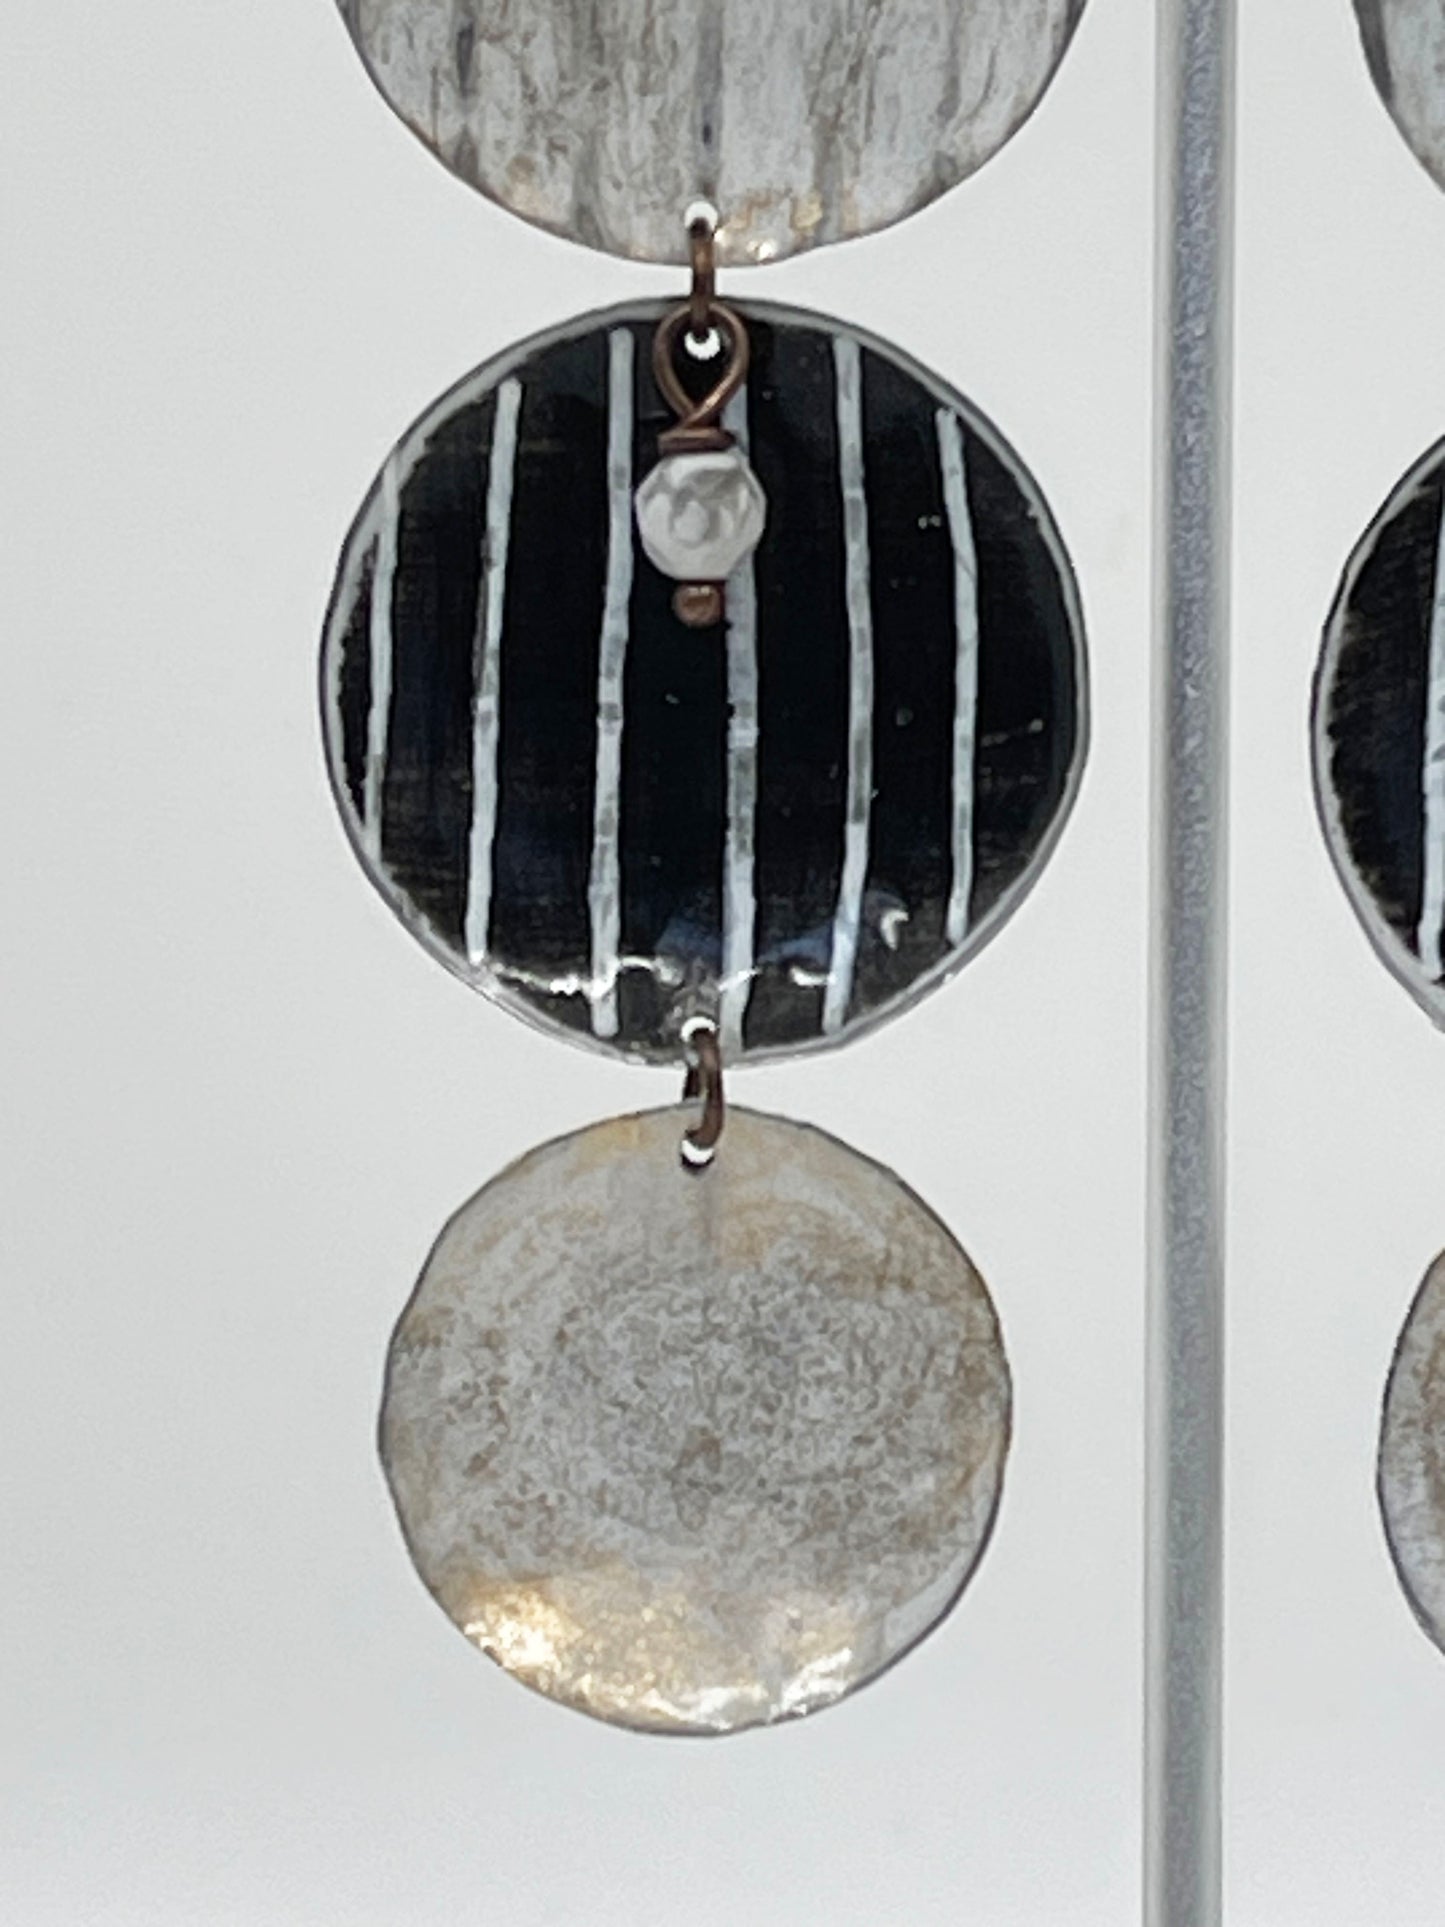 Black & White Cascading Circles Dangle Earrings w/ Posts, Recycled Tin, "Moonlit Night"